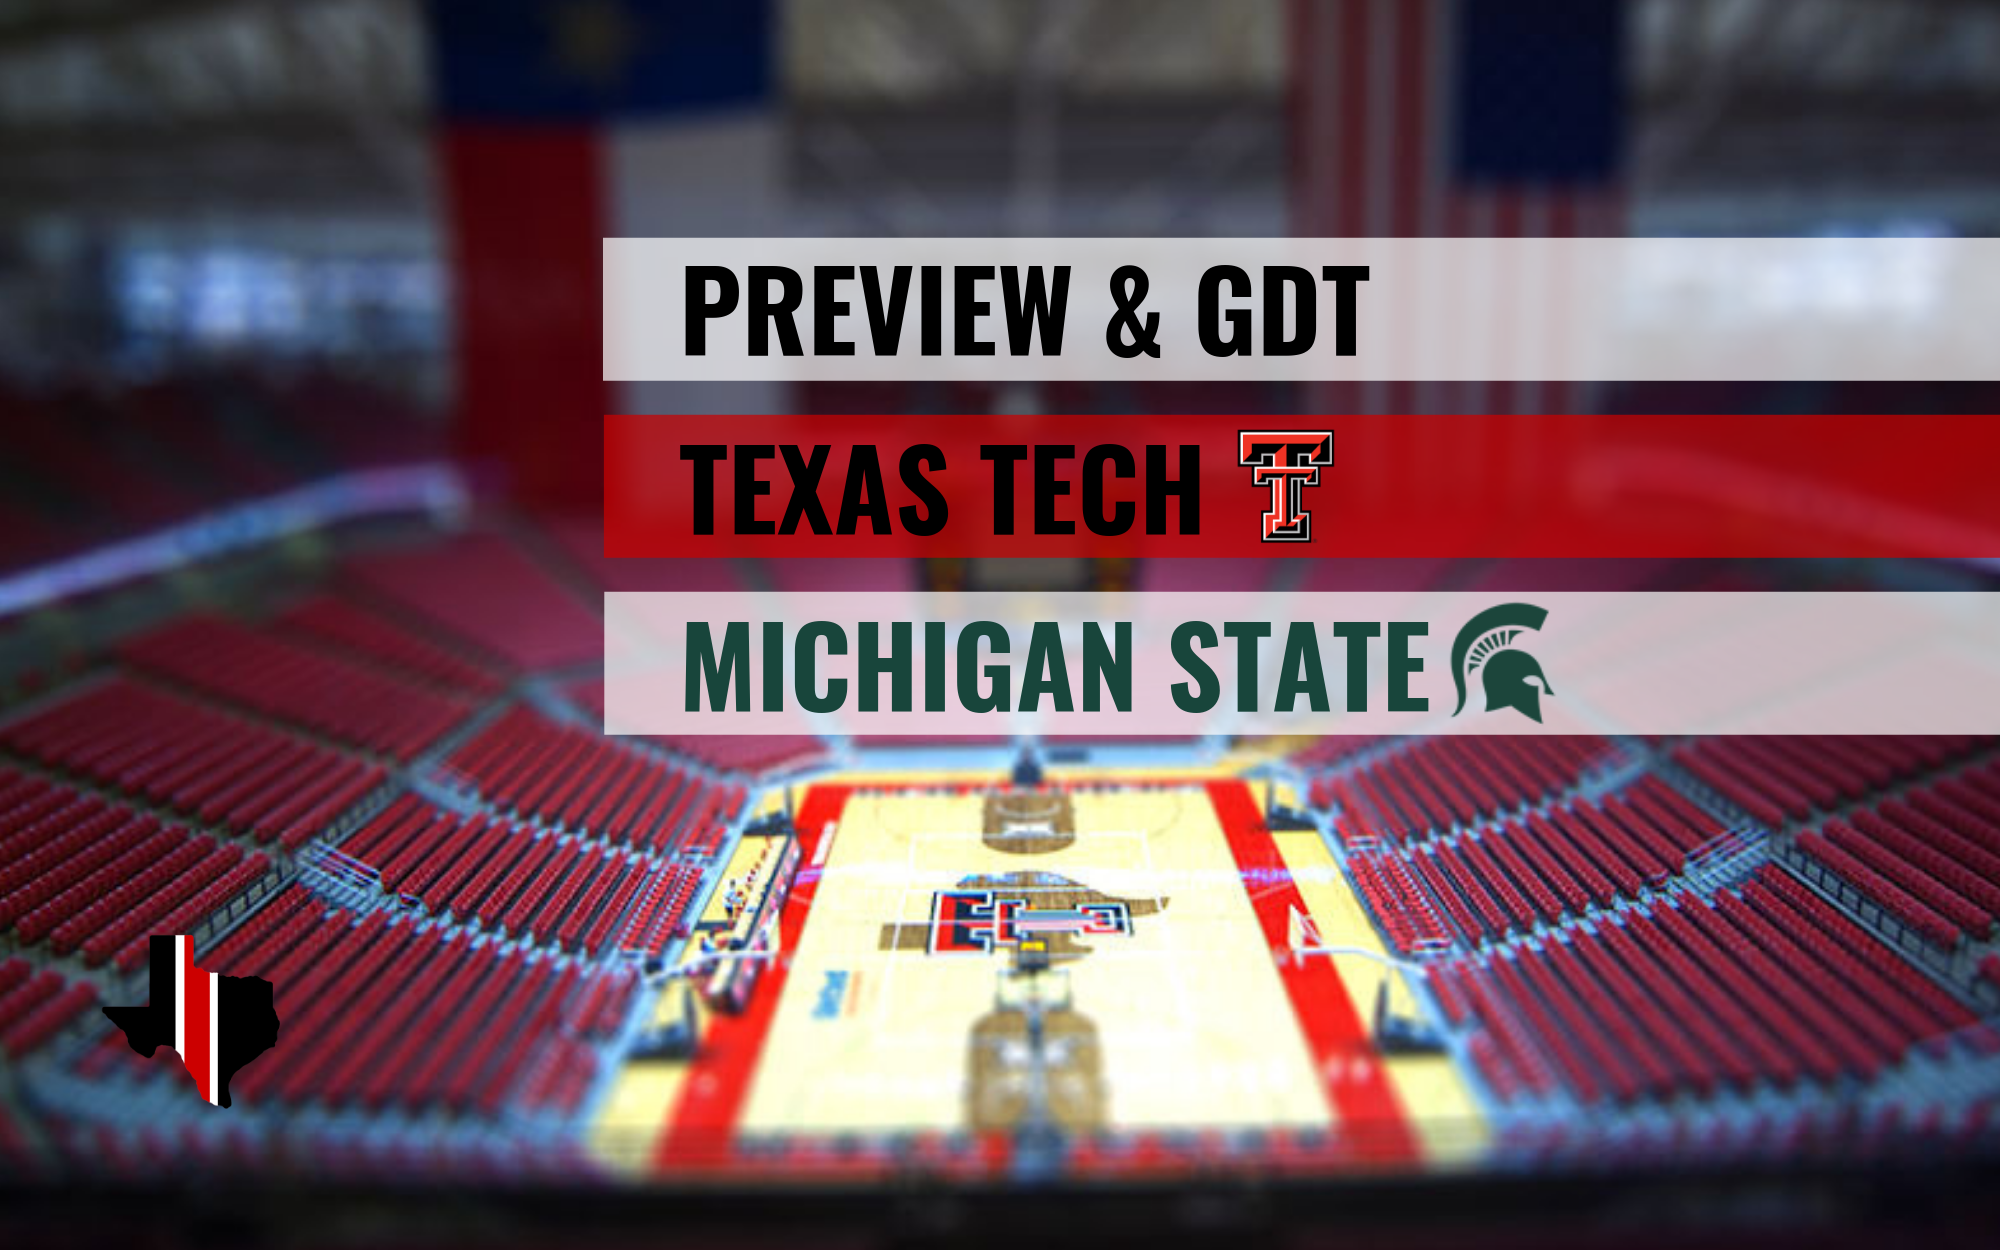 Preview & GDT: Texas Tech vs. Michigan State